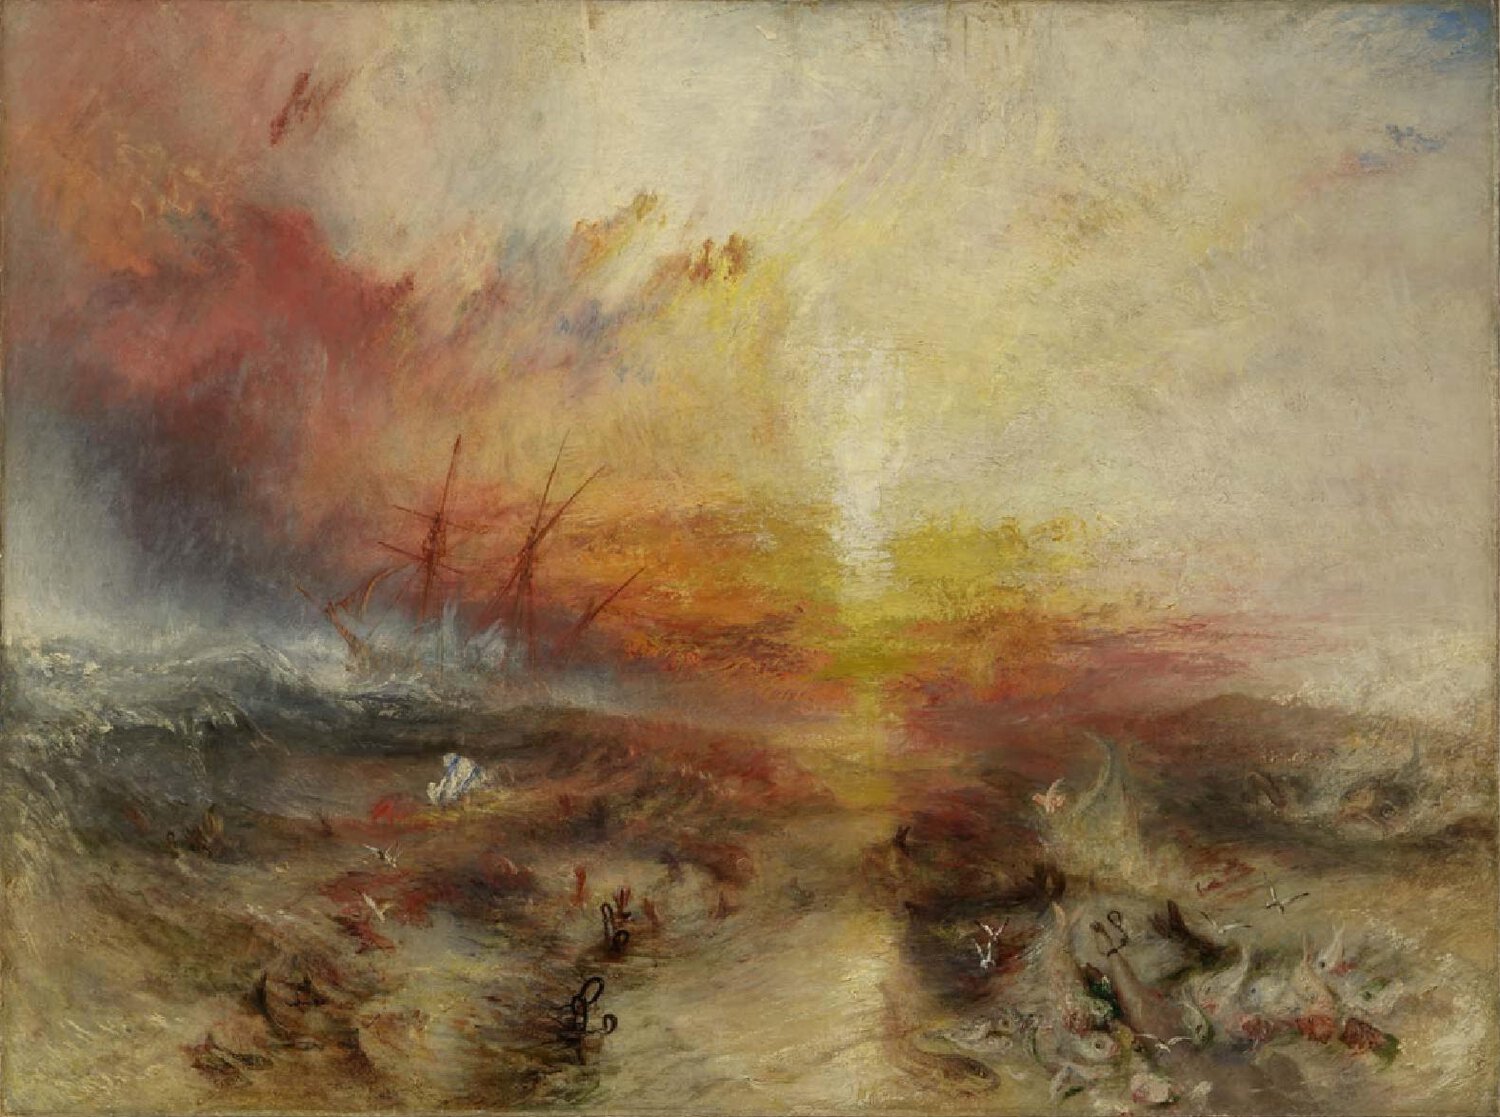 Scene of storm at sea with ship in background and various individuals and items in the water.